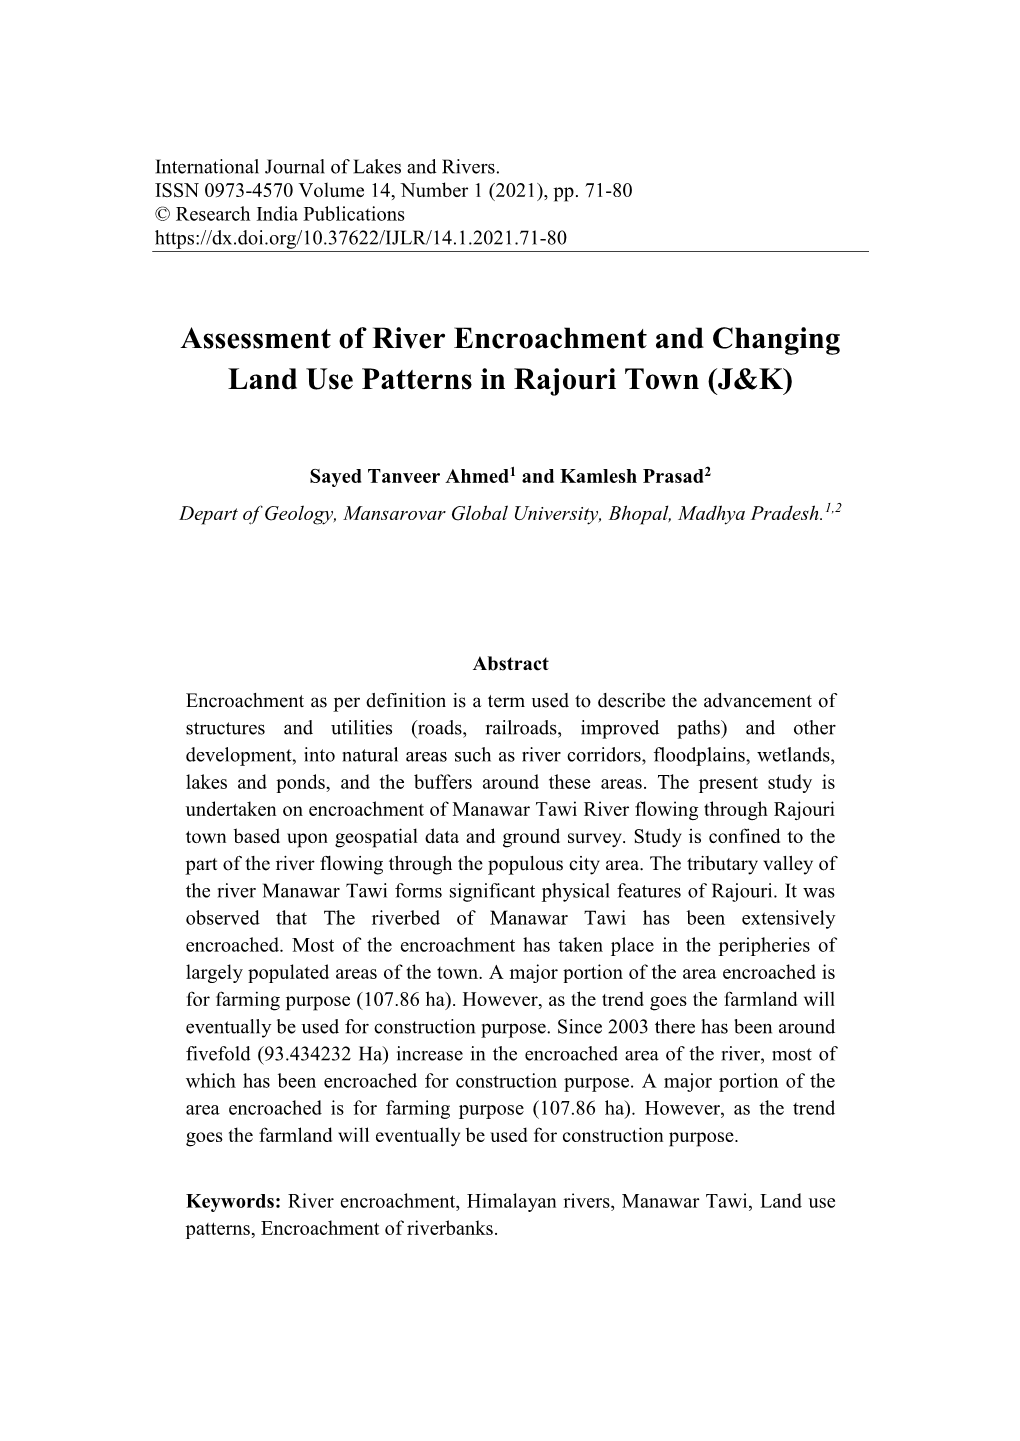 Assessment of River Encroachment and Changing Land Use Patterns in Rajouri Town (J&K)